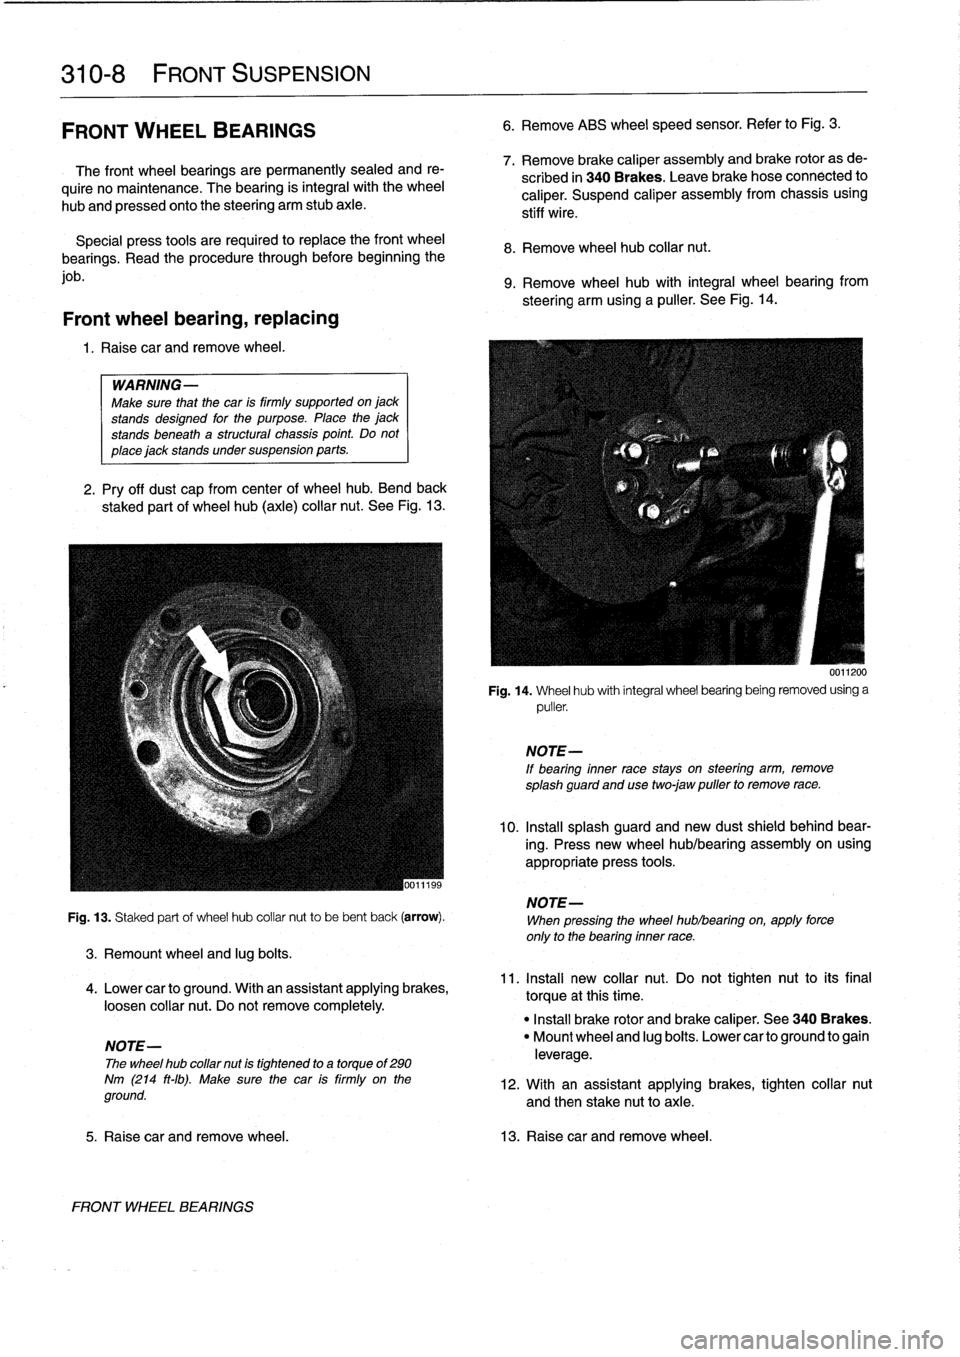 BMW 323i 1995 E36 Owners Manual 
310-
8

	

FRONT
SUSPENSION

FRONT
WHEEL
BEARINGS

The
front
wheel
bearings
are
permanently
sealed
and
re-

quire
no
maintenance
.
The
bearing
is
integral
with
the
wheel

hub
and
pressed
onto
the
ste